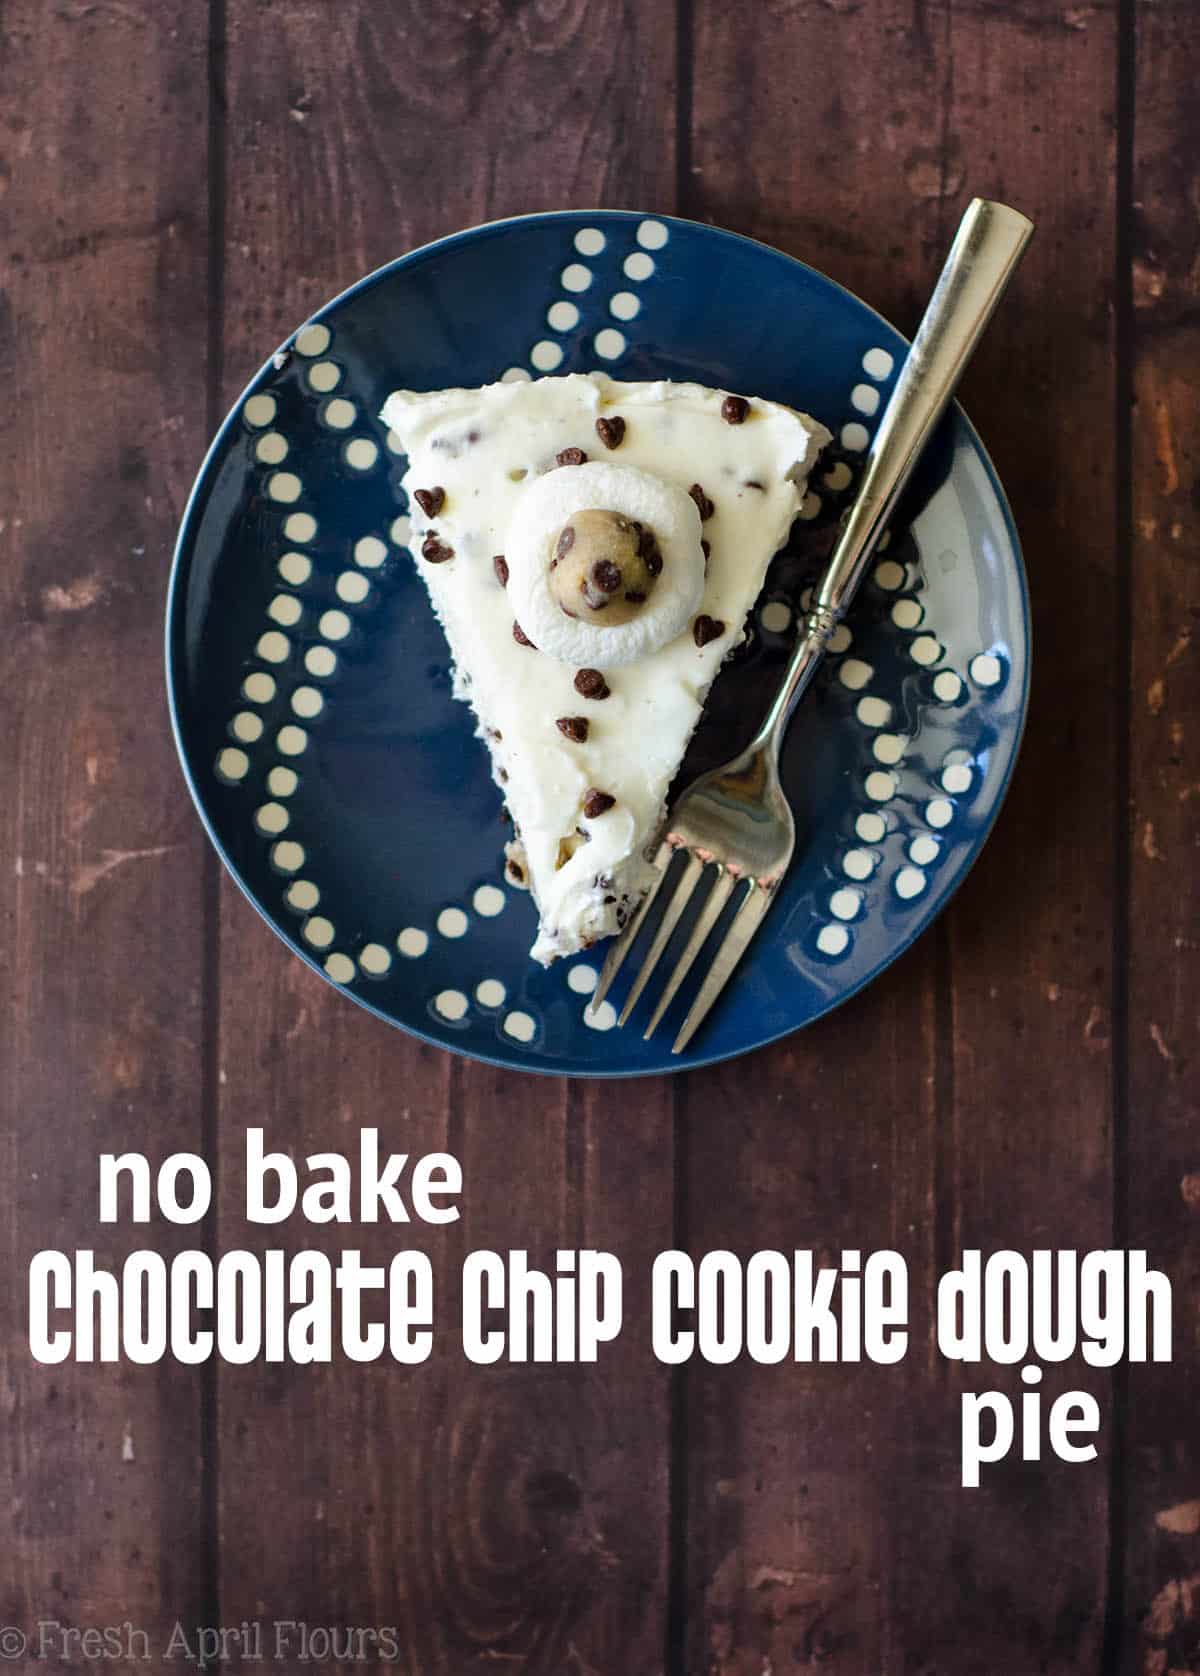 No Bake Chocolate Chip Cookie Dough Pie: An easy, cheesecake-like pie filled with edible cookie dough pieces and plenty of chocolate chips, all atop a crunchy Oreo crust. via @frshaprilflours